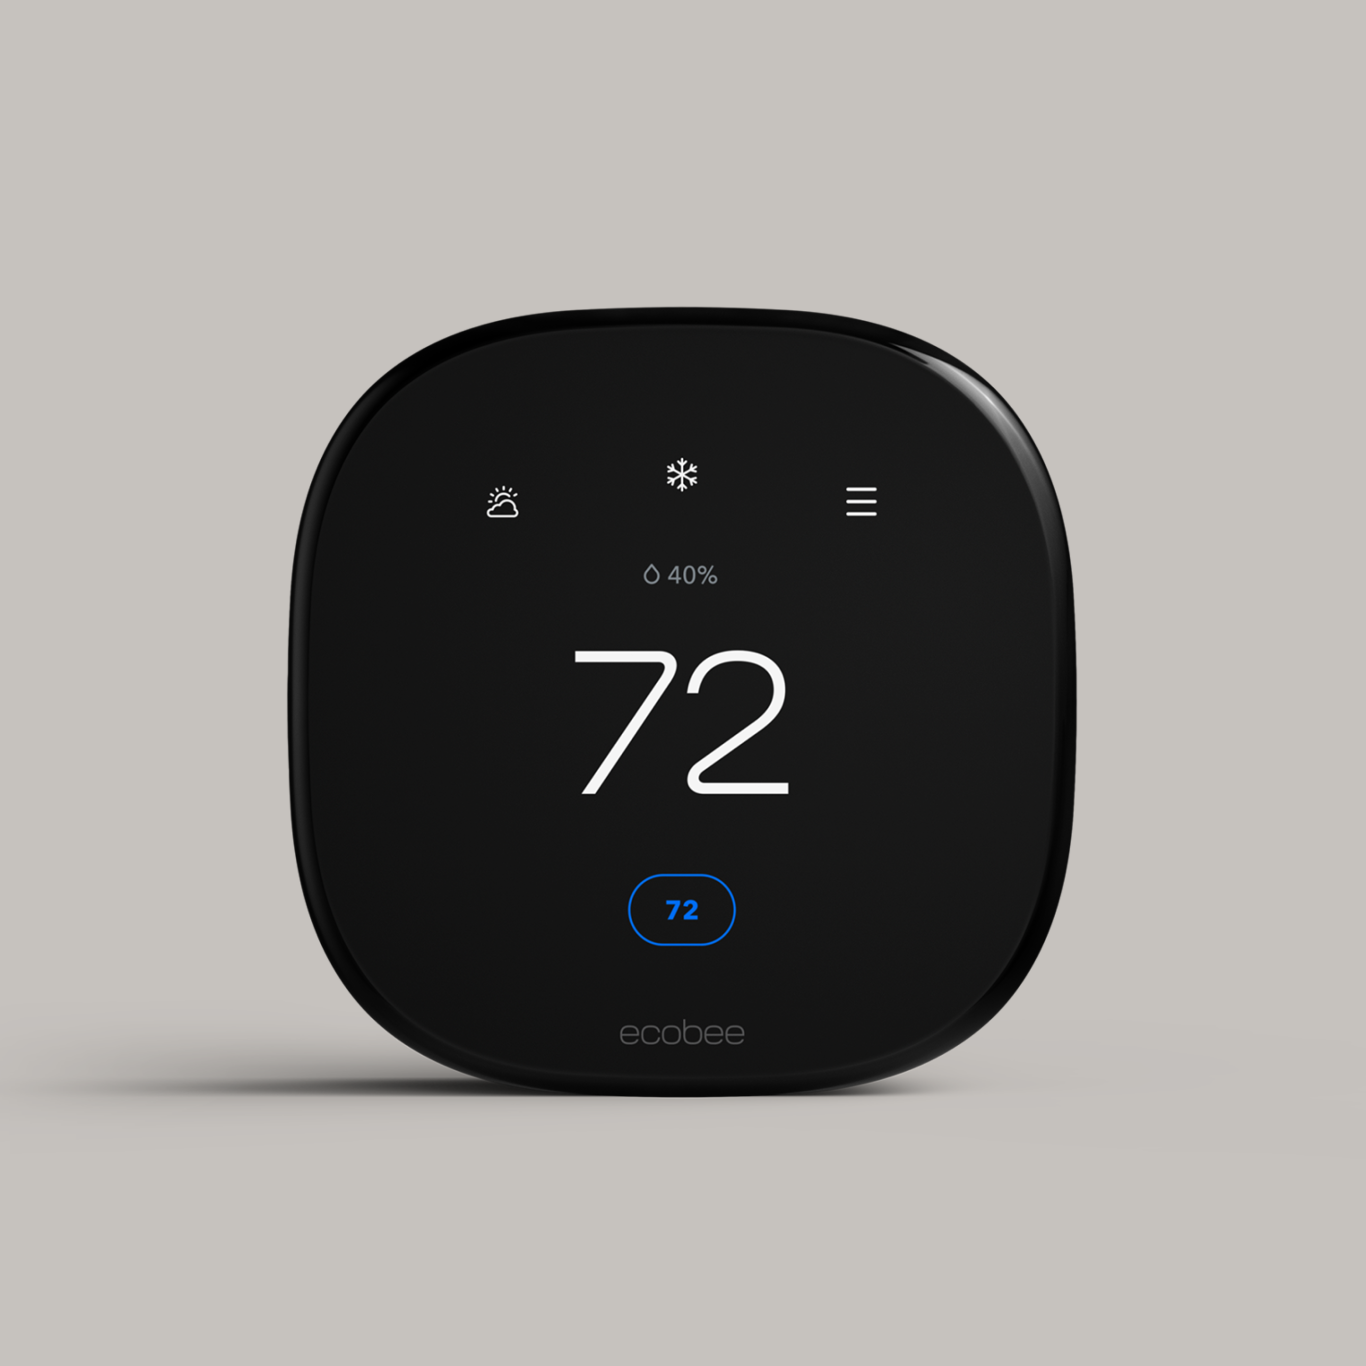 Behind the scenes with the new Nest Thermostat